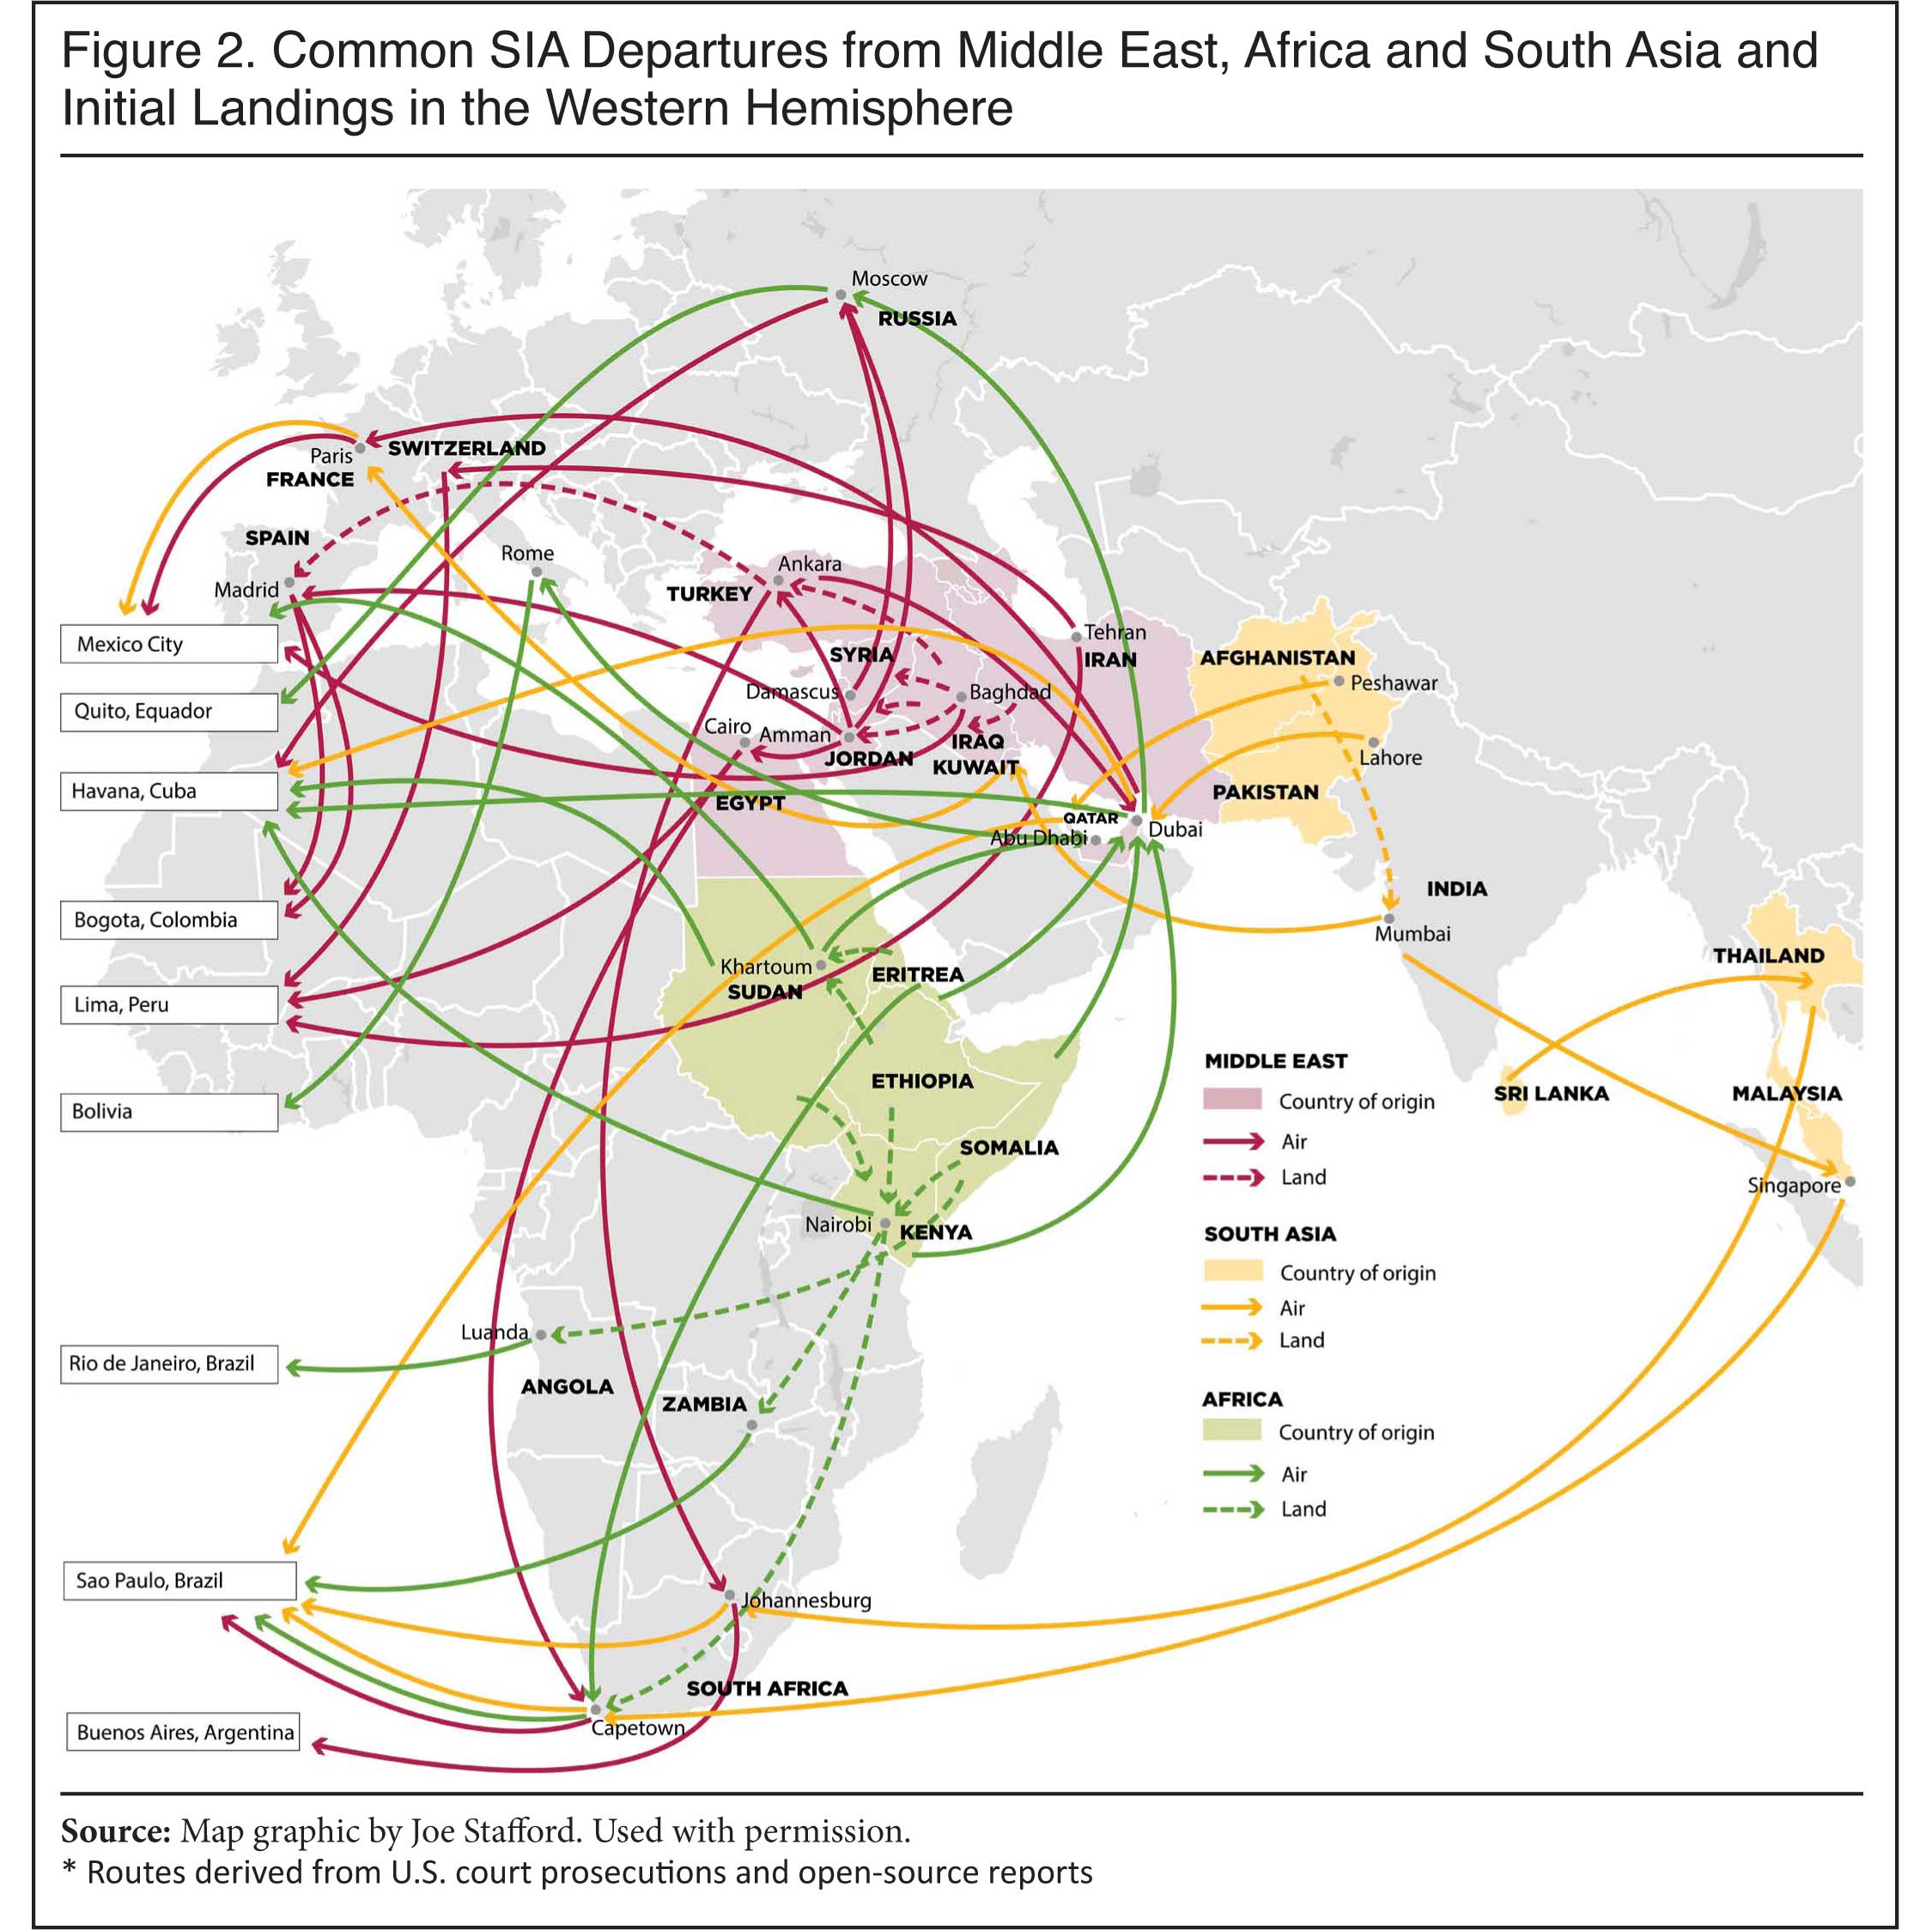 Map: Common SIA Departures from Middle East, Africa and South Asia and Initial Landings in the Western Hemisphere